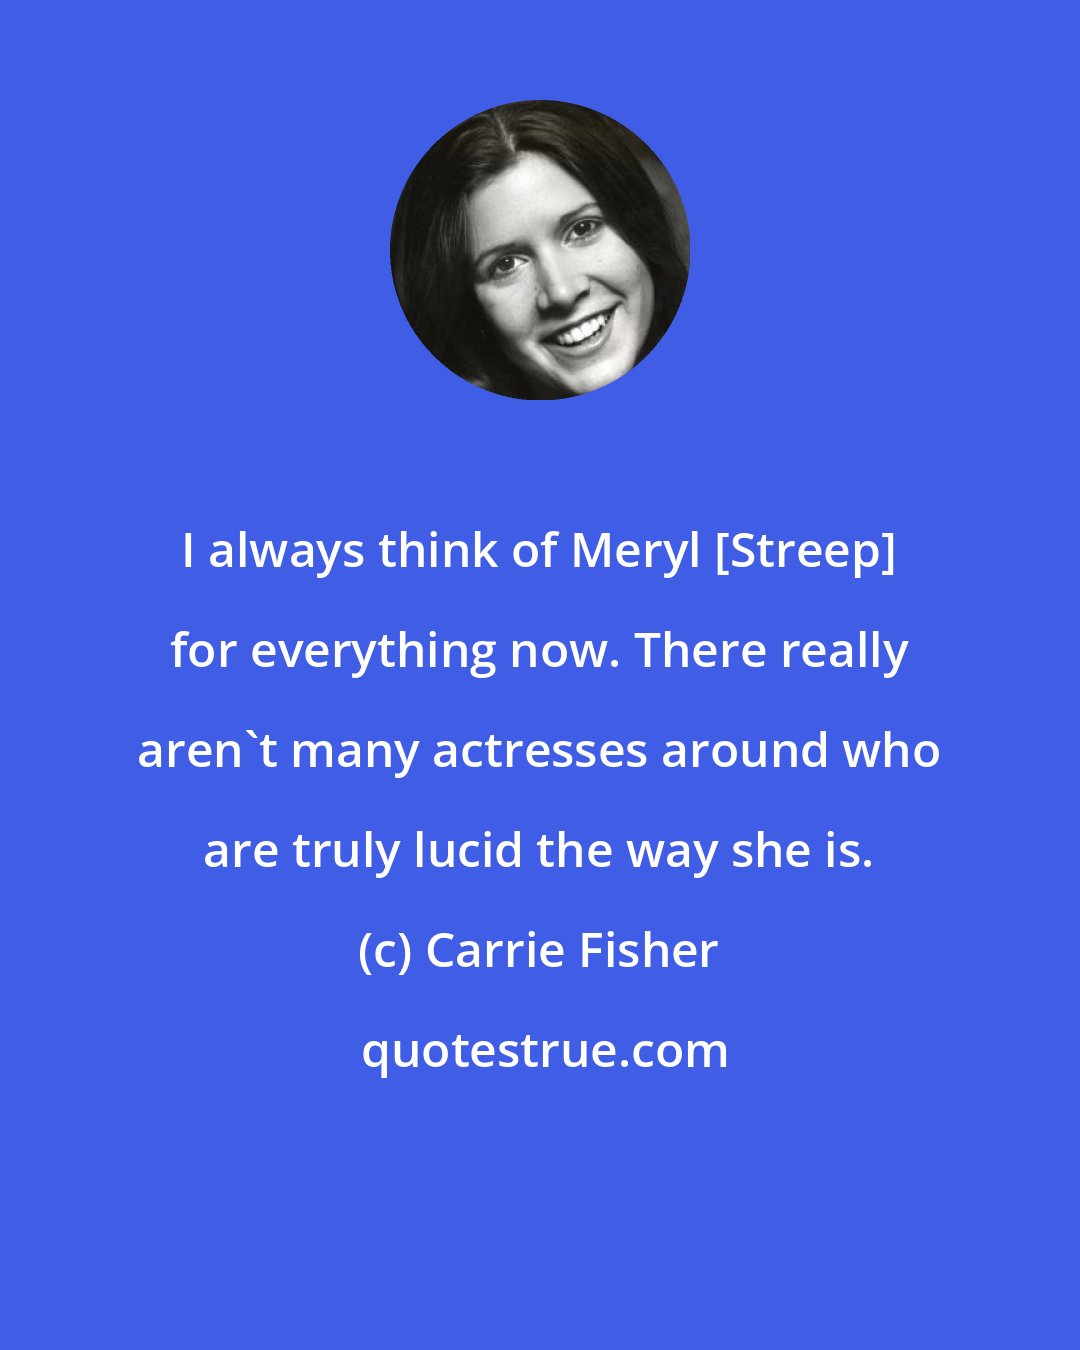 Carrie Fisher: I always think of Meryl [Streep] for everything now. There really aren't many actresses around who are truly lucid the way she is.